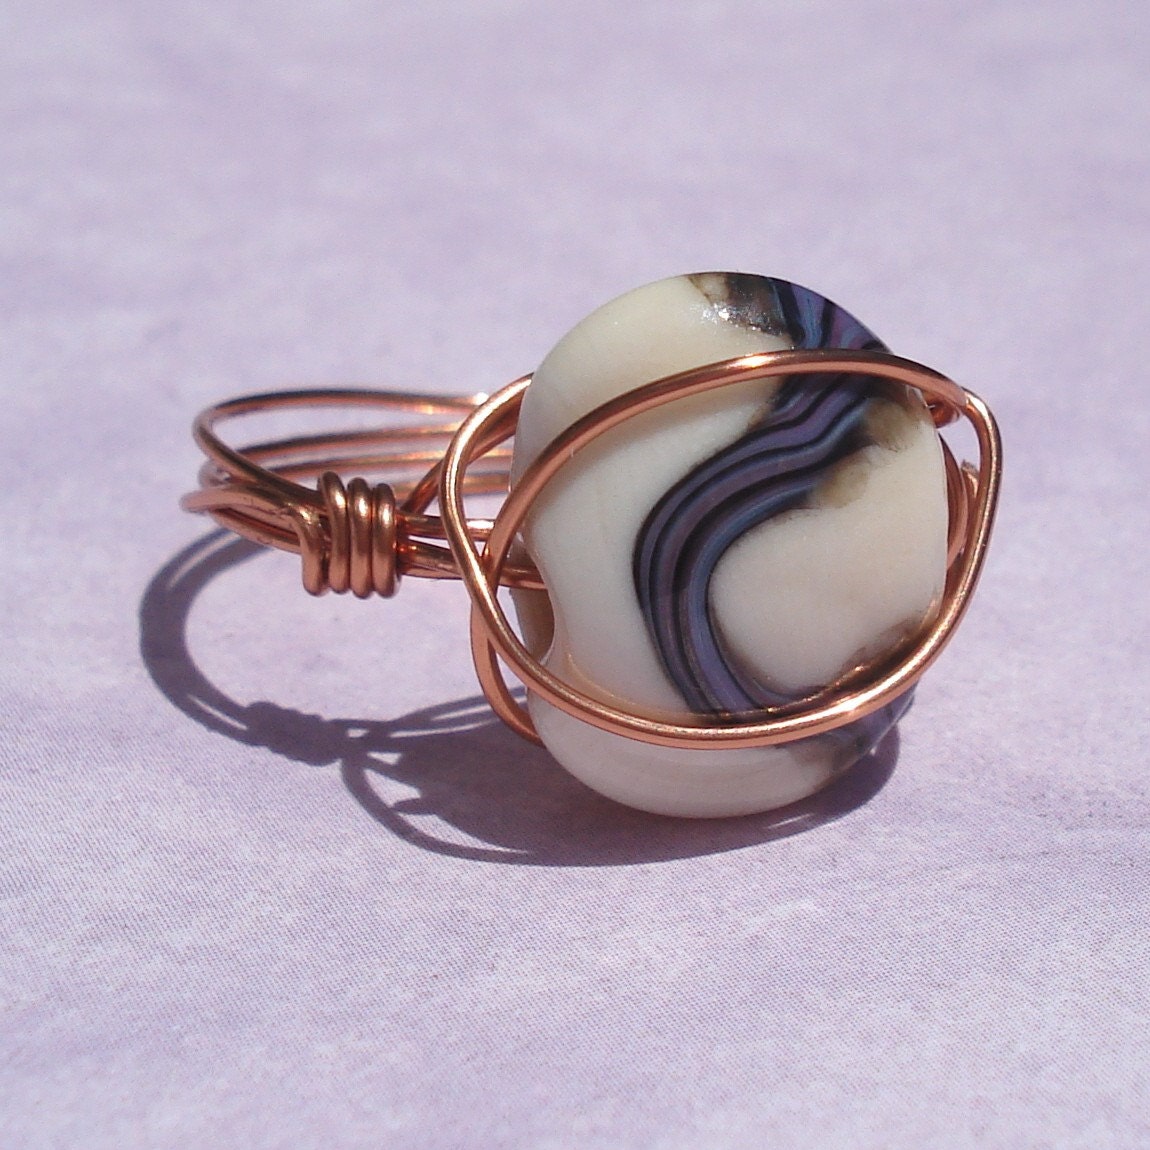 wire wrapped copper ring with artisan lampwork glass bead